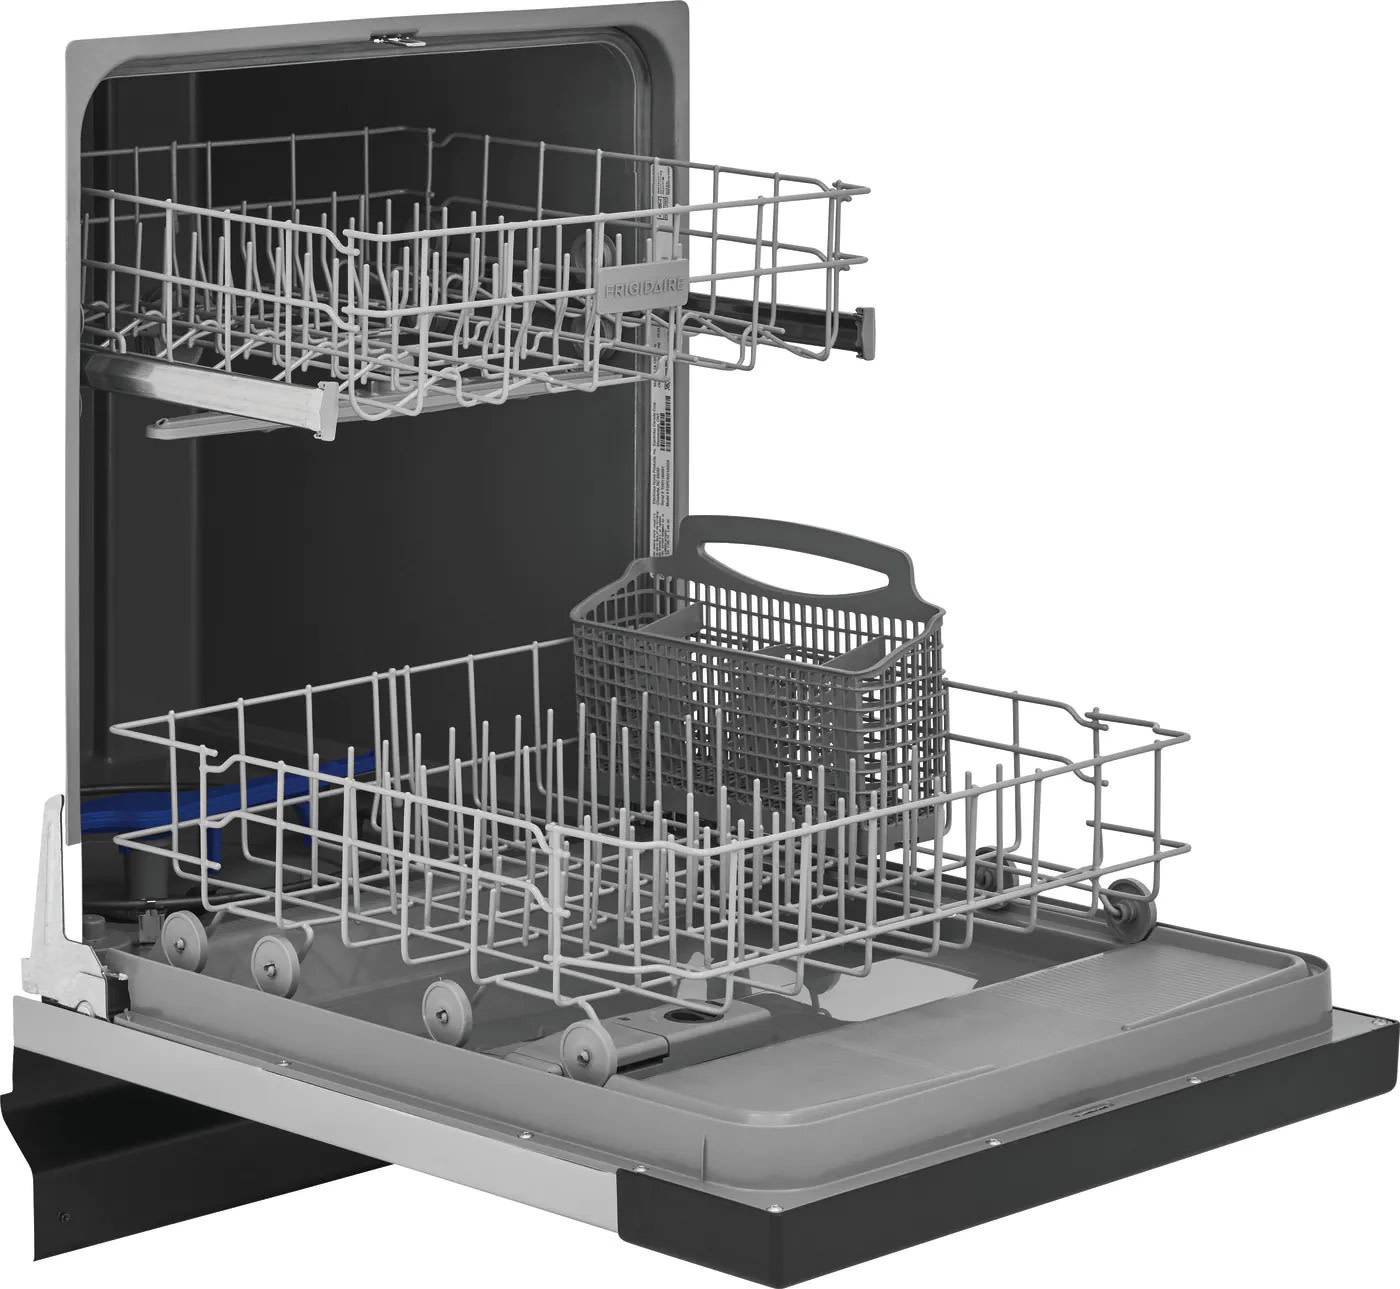 Frigidaire FDPC4314AS 24 Inch Full Console Dishwasher with 14